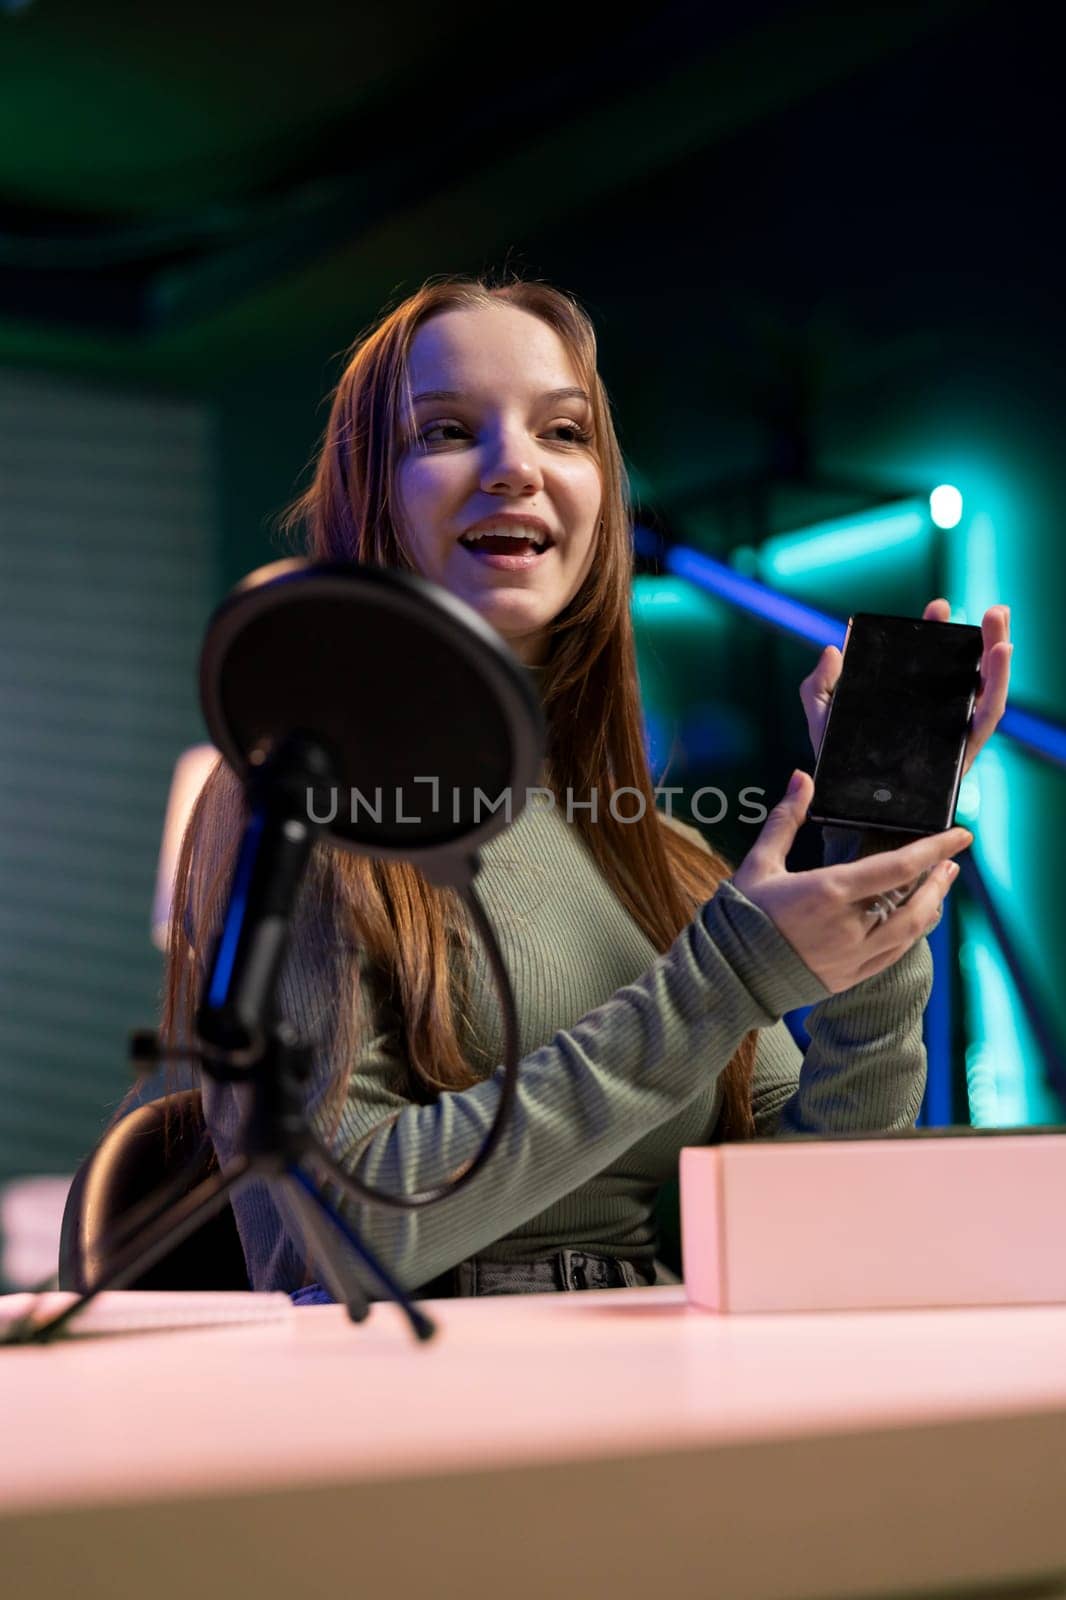 Teenager content creator filming technology review of newly released smartphone, unpacking it and presenting specifications to audience. Media star showing cellphone to fans from studio